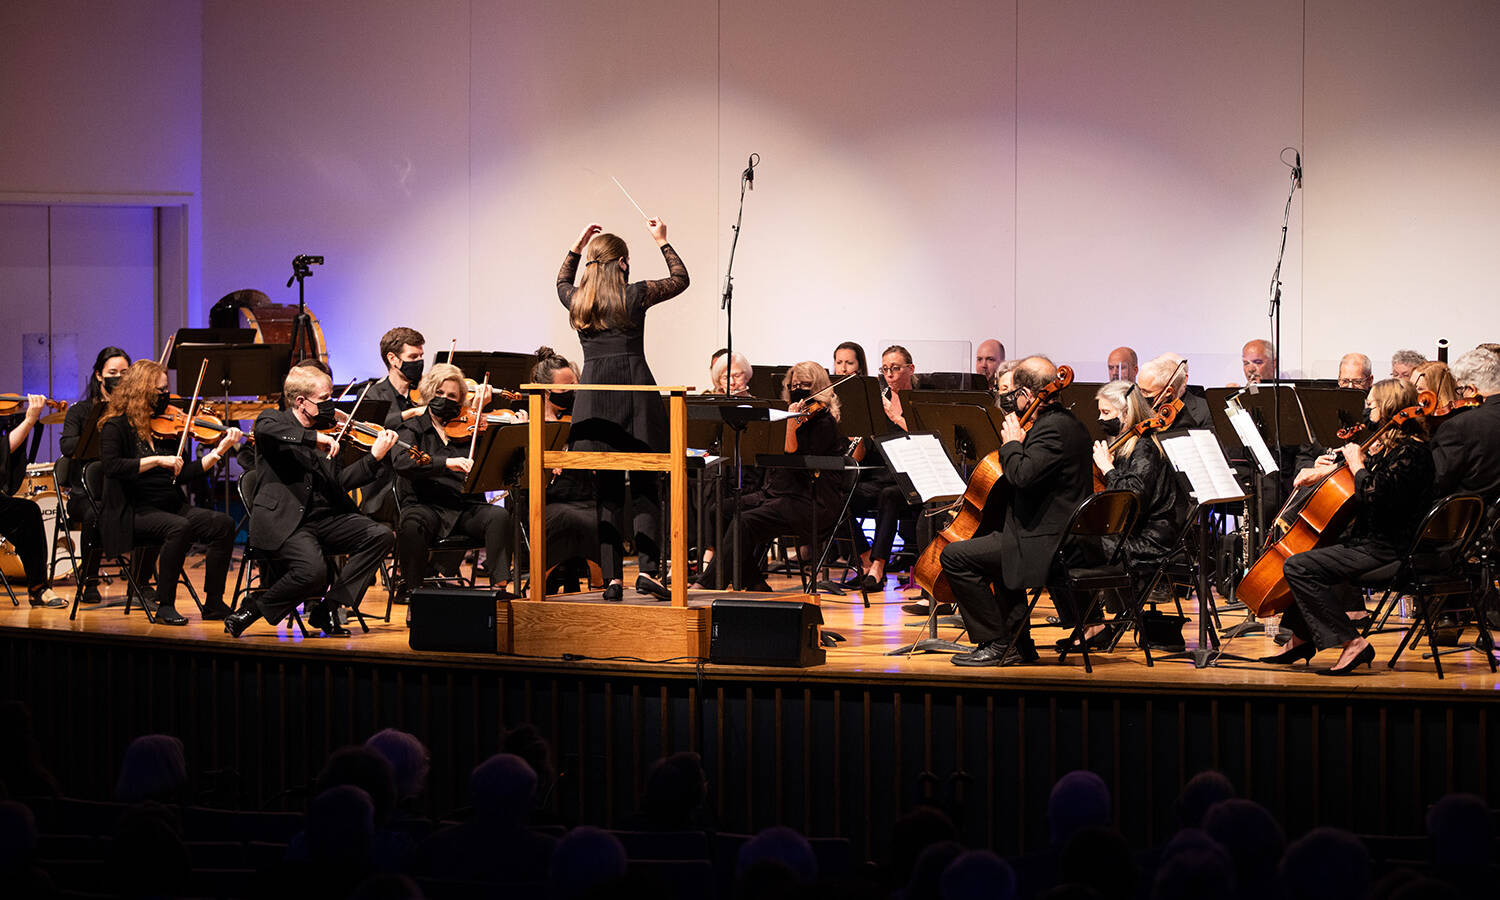 Salem College community orchestra playing while conductor leads